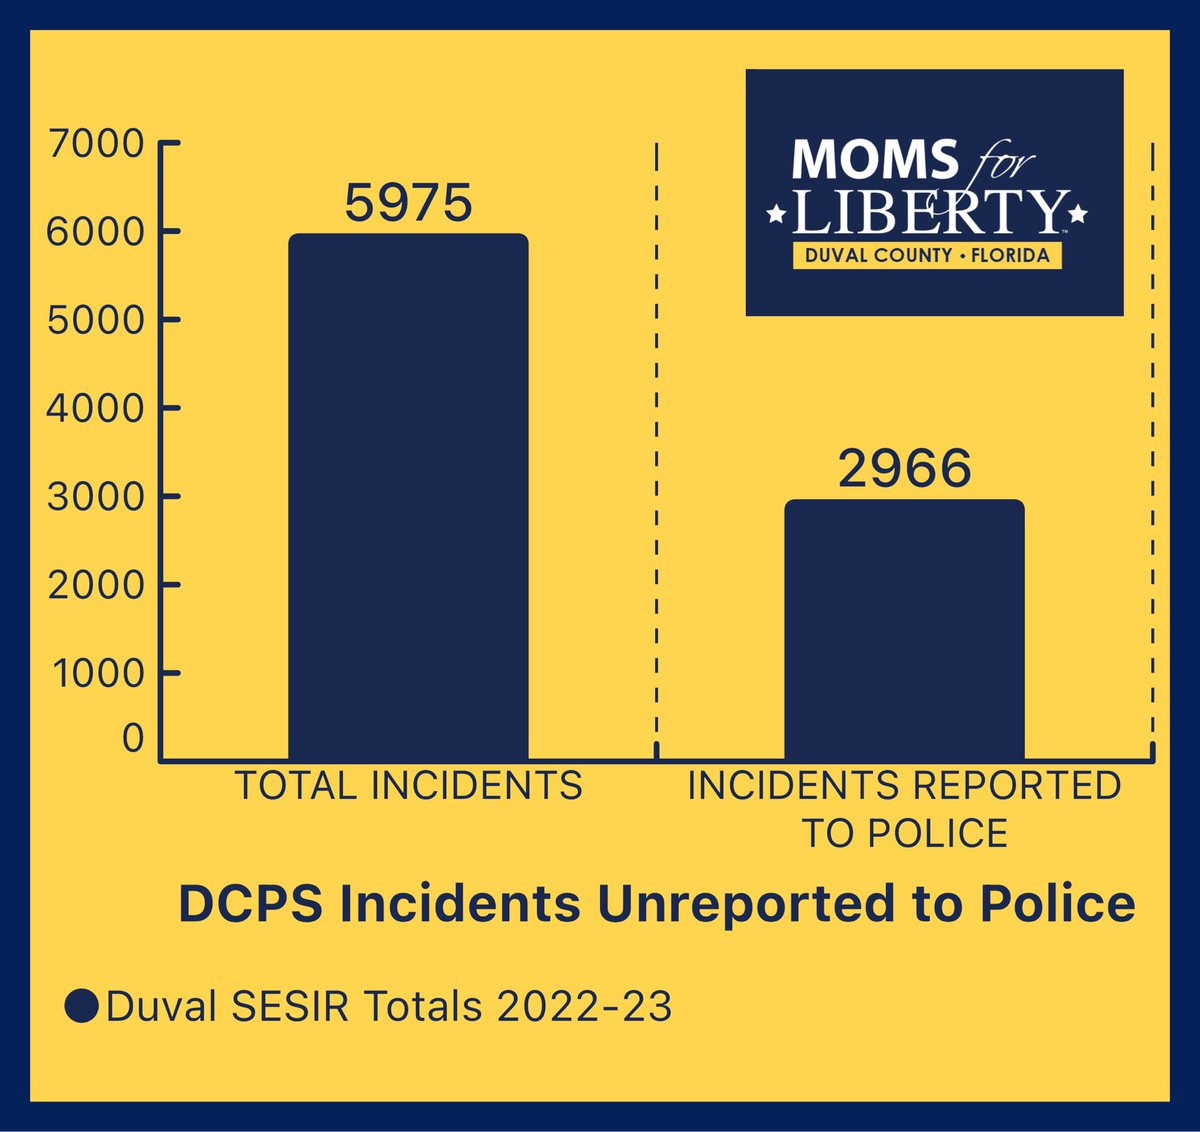 School safety is paramount. Reporting crime and incidents to the police is imperative.  #DCPS #Duval #Jacksonville #MomsforLiberty #SchoolSafety #JSO